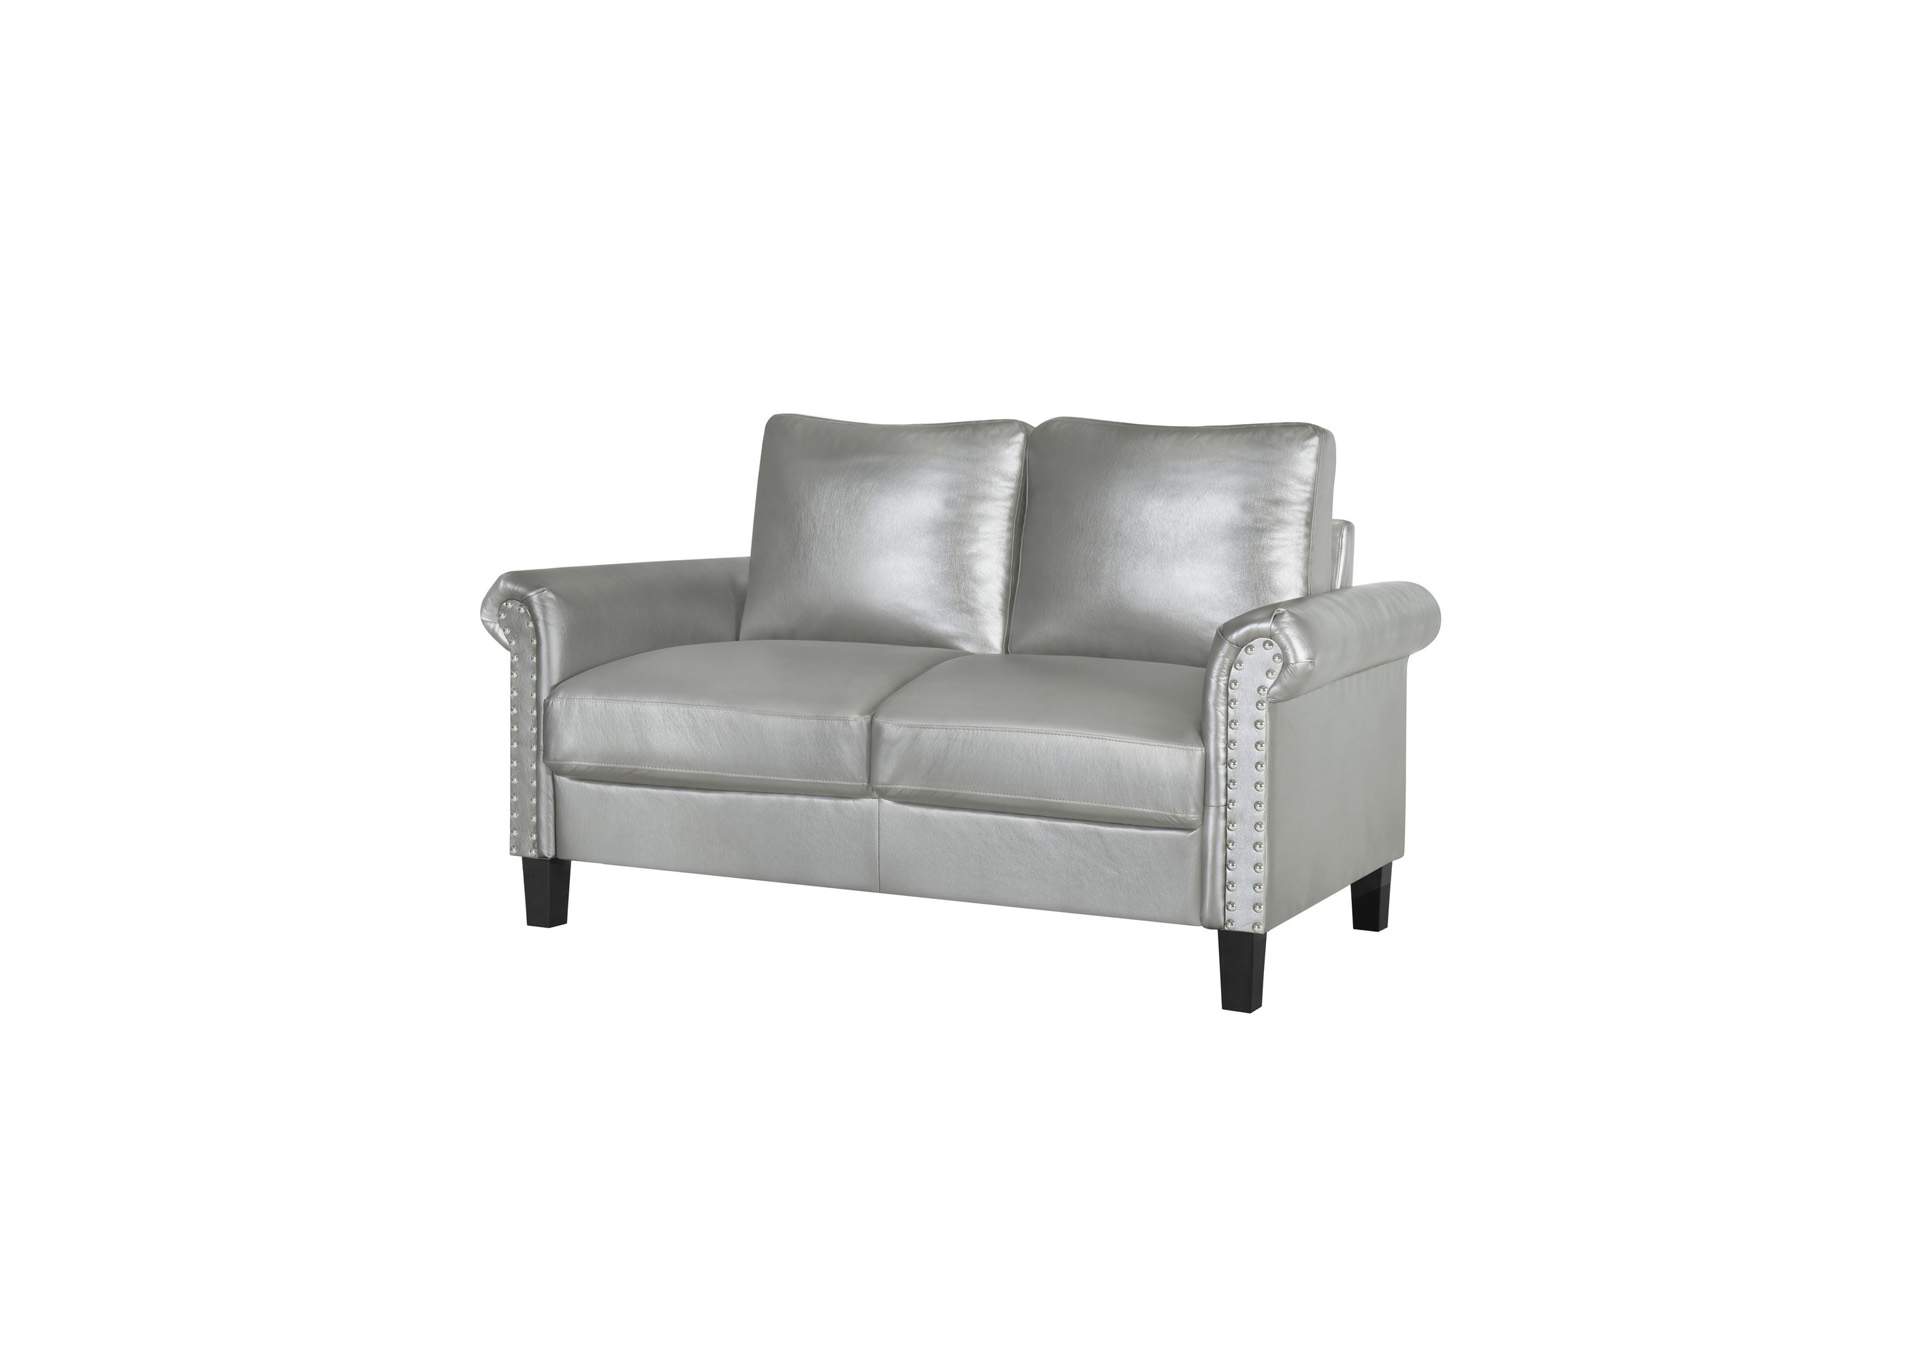 Silver Faux Leather Loveseat Best, Silver Leather Chair